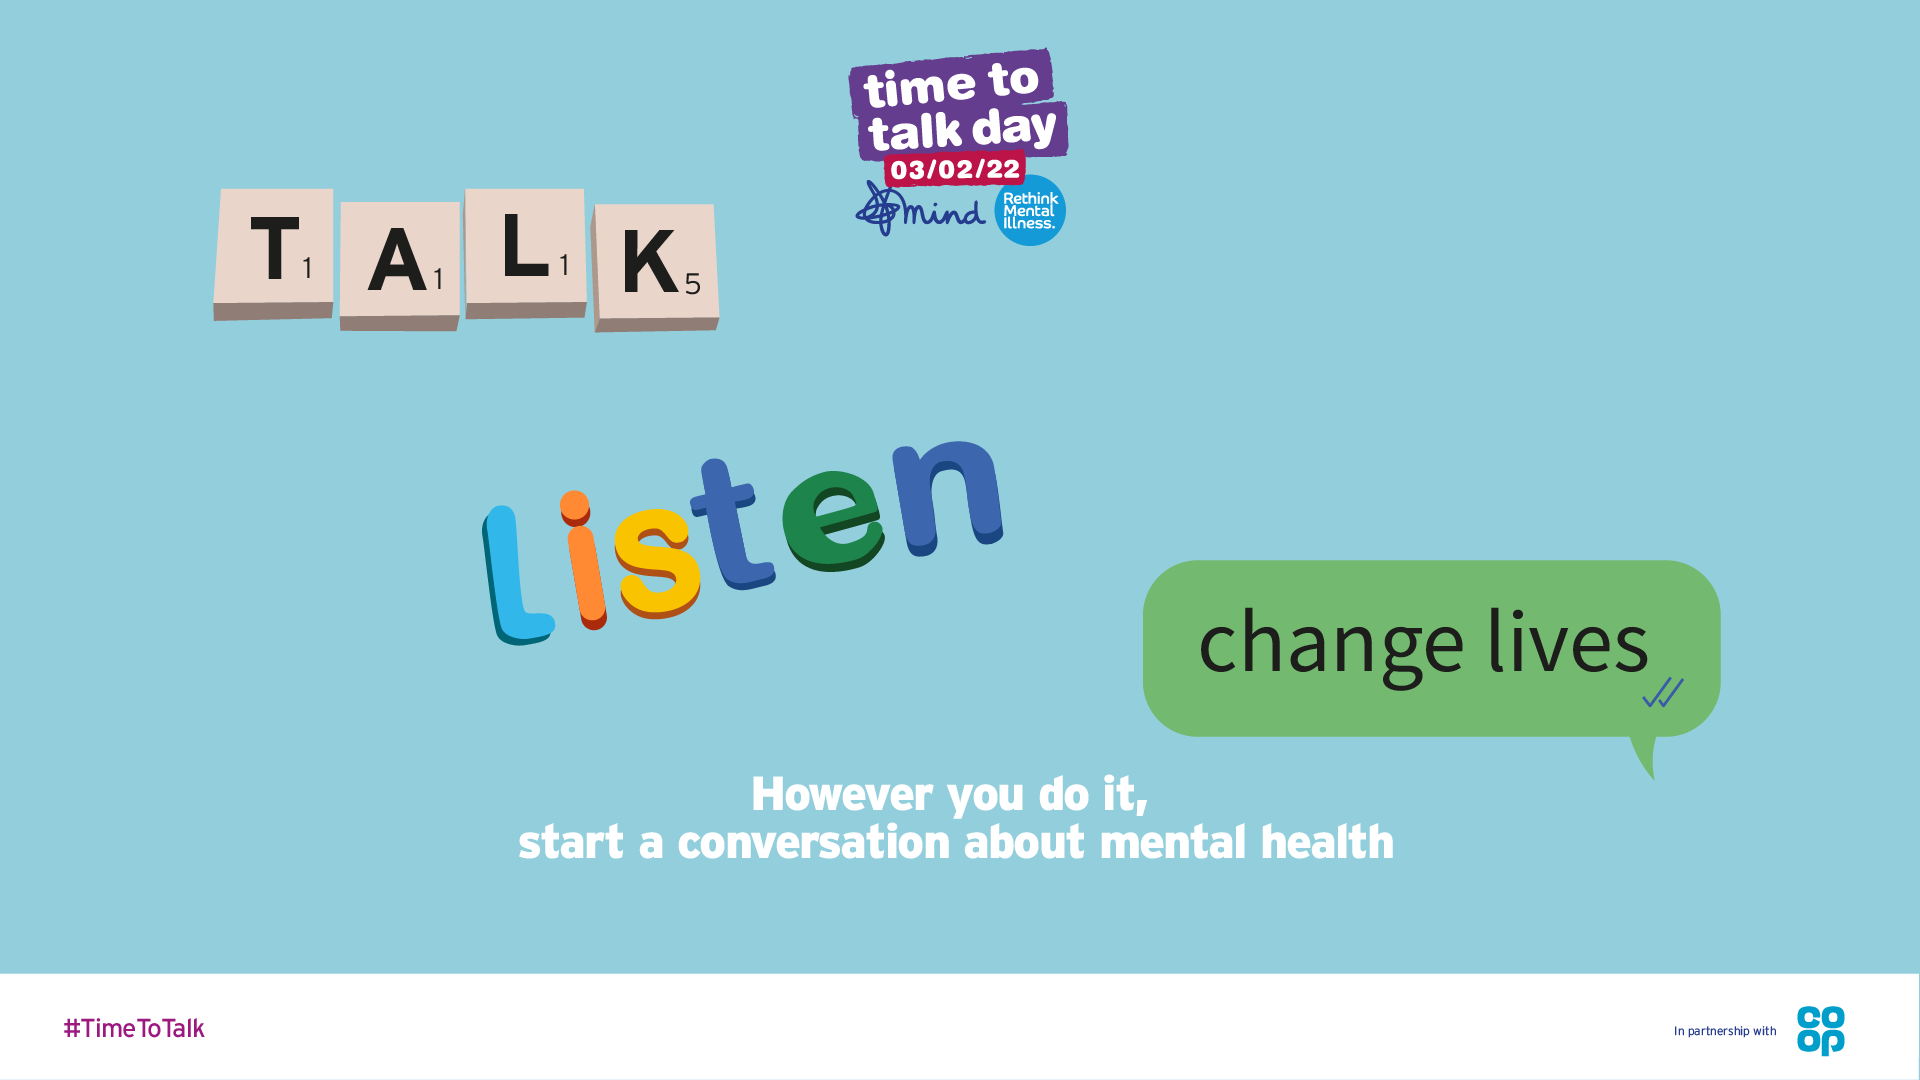 Time to Talk Day – how will you start a conversation about mental health?